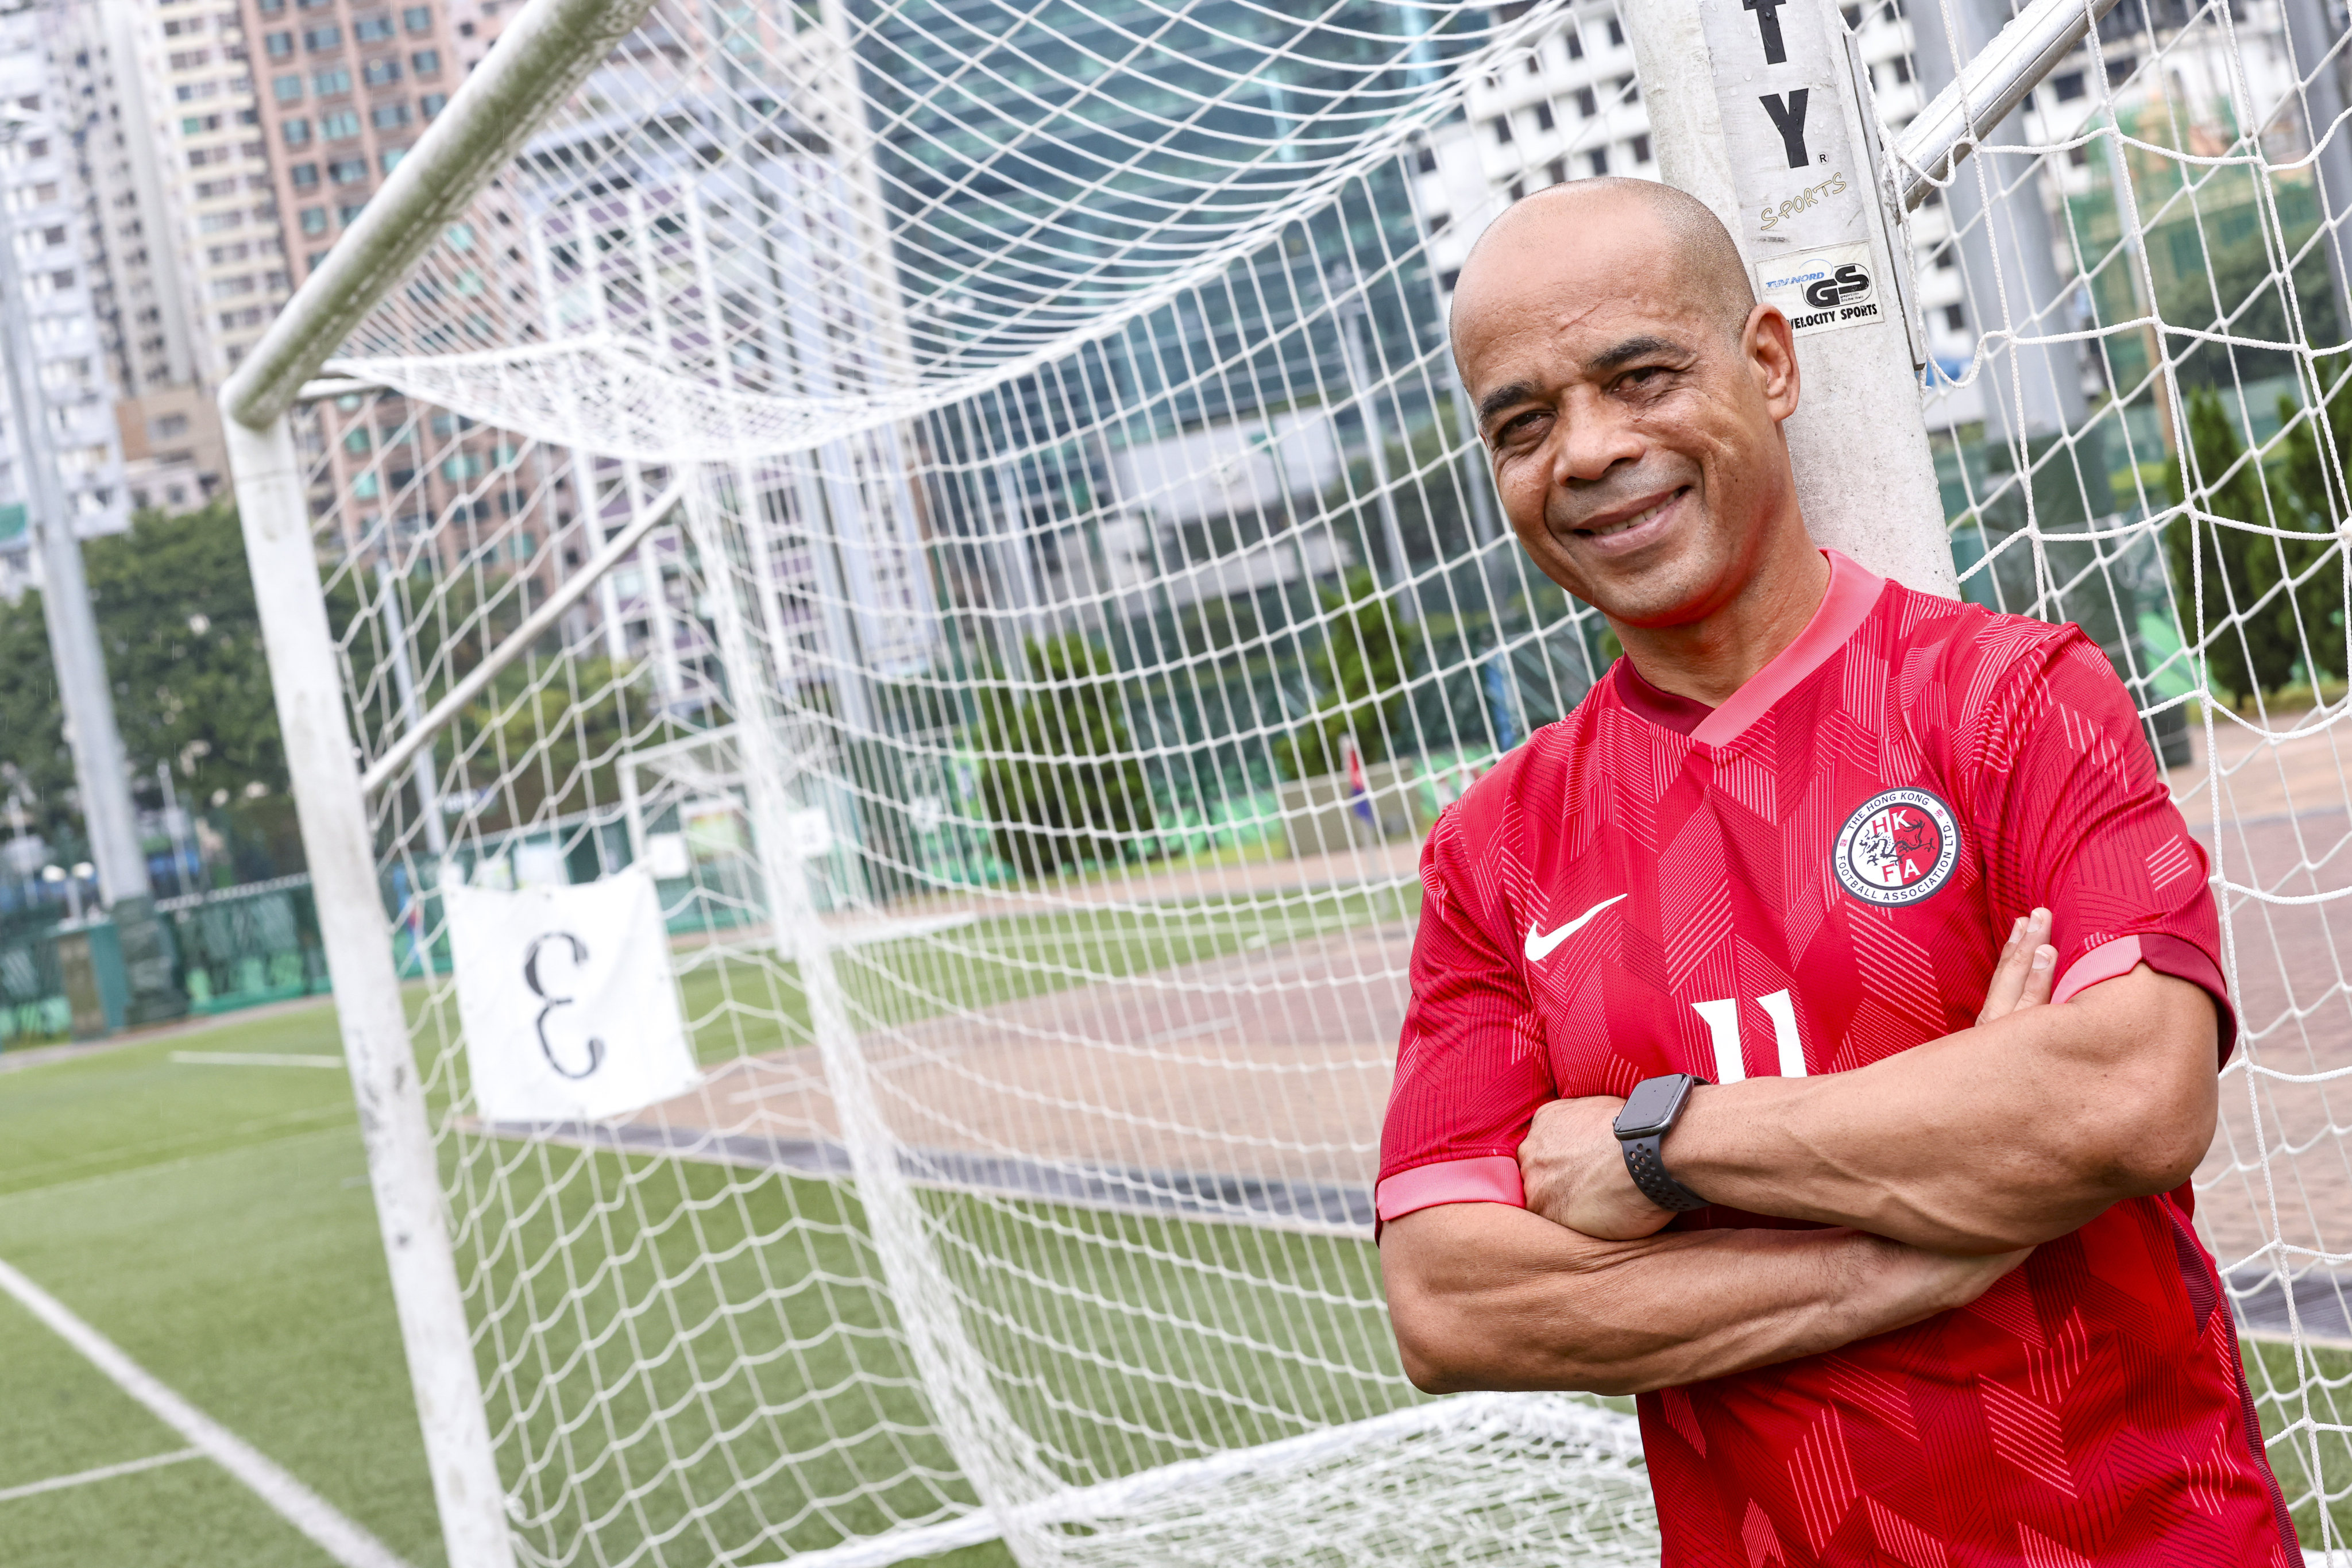 Anilton da Conceicao is returning home to Brazil after spending 25 years in Hong Kong. Photo: K.Y. Cheng